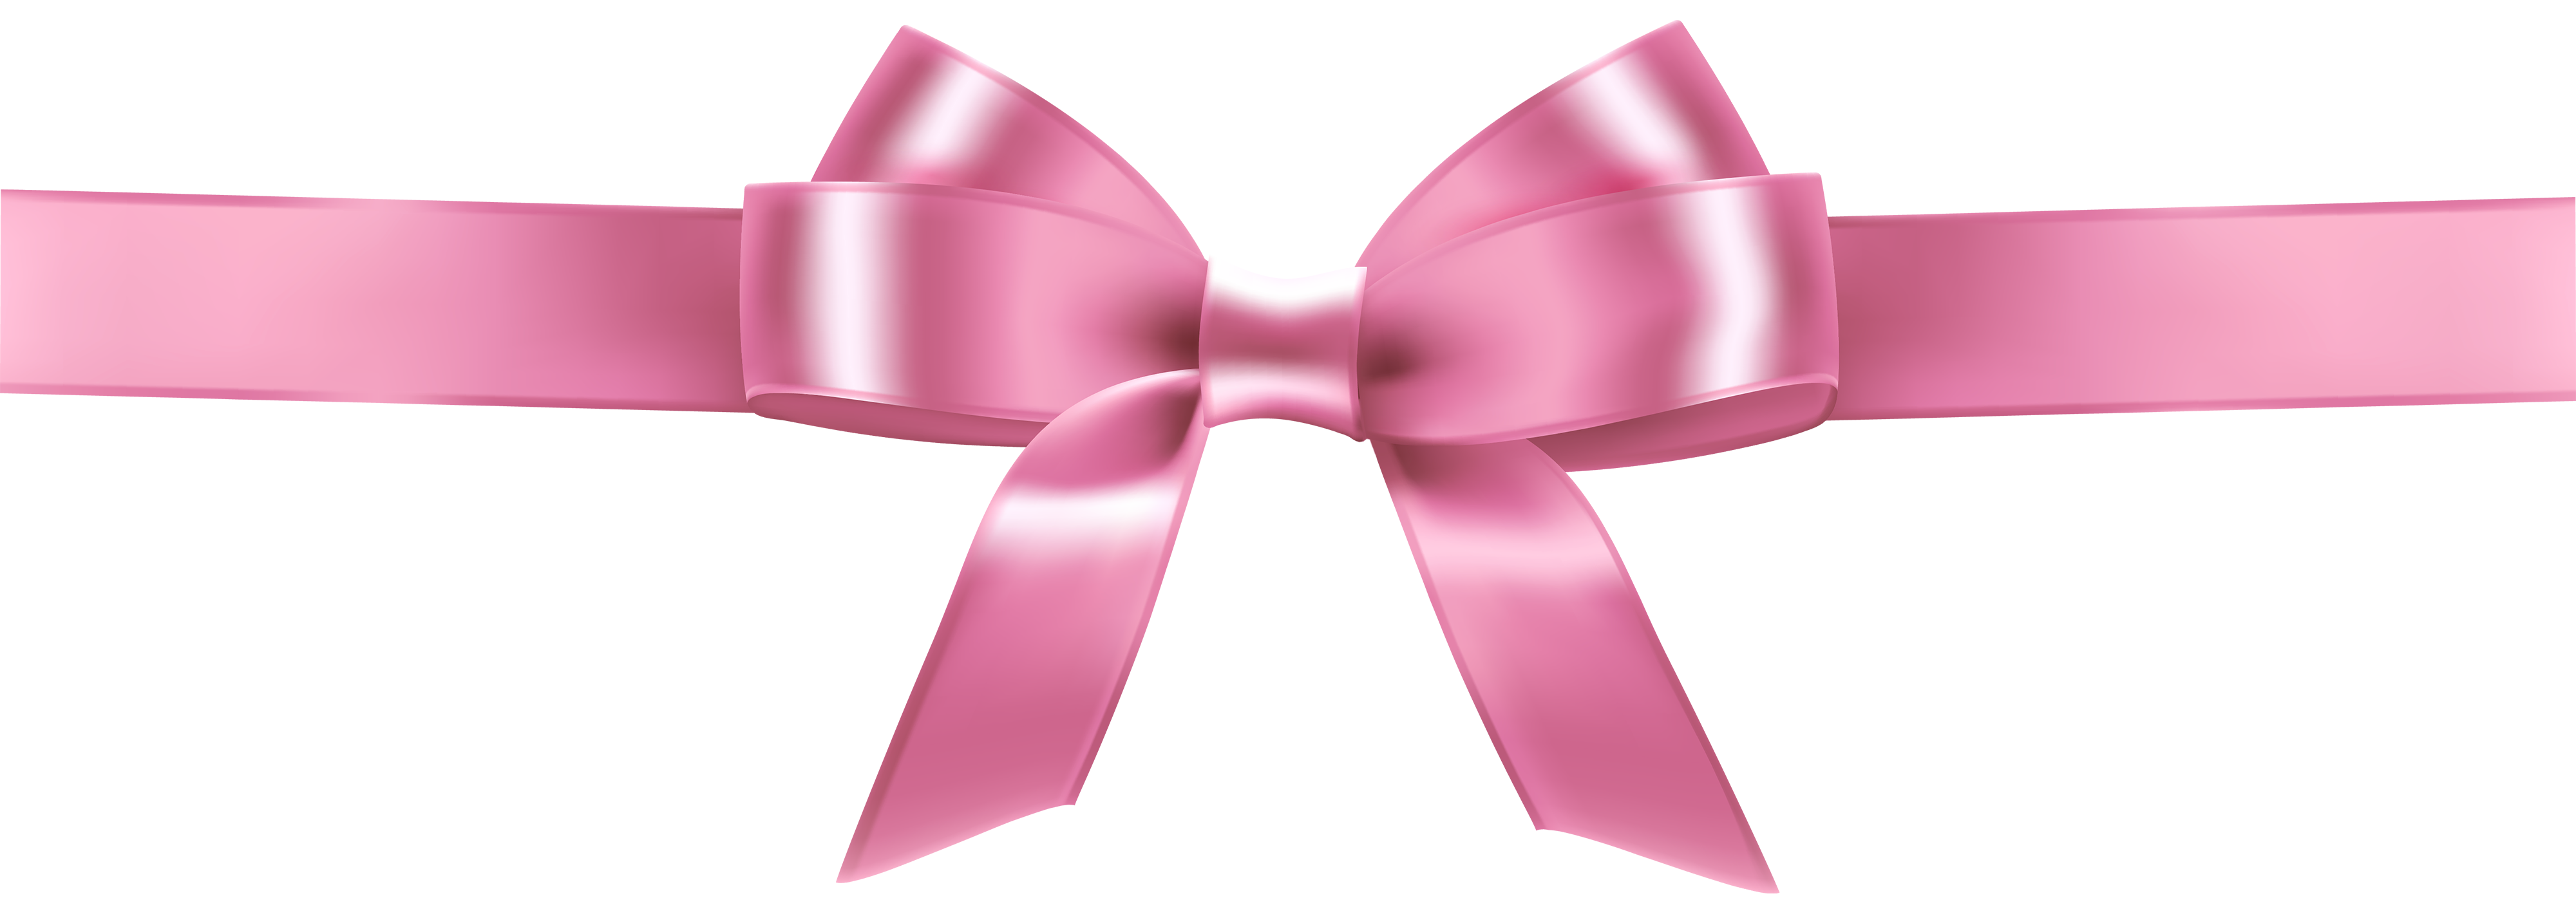 Pink Ribbon PNG Clipart - Best WEB Clipart